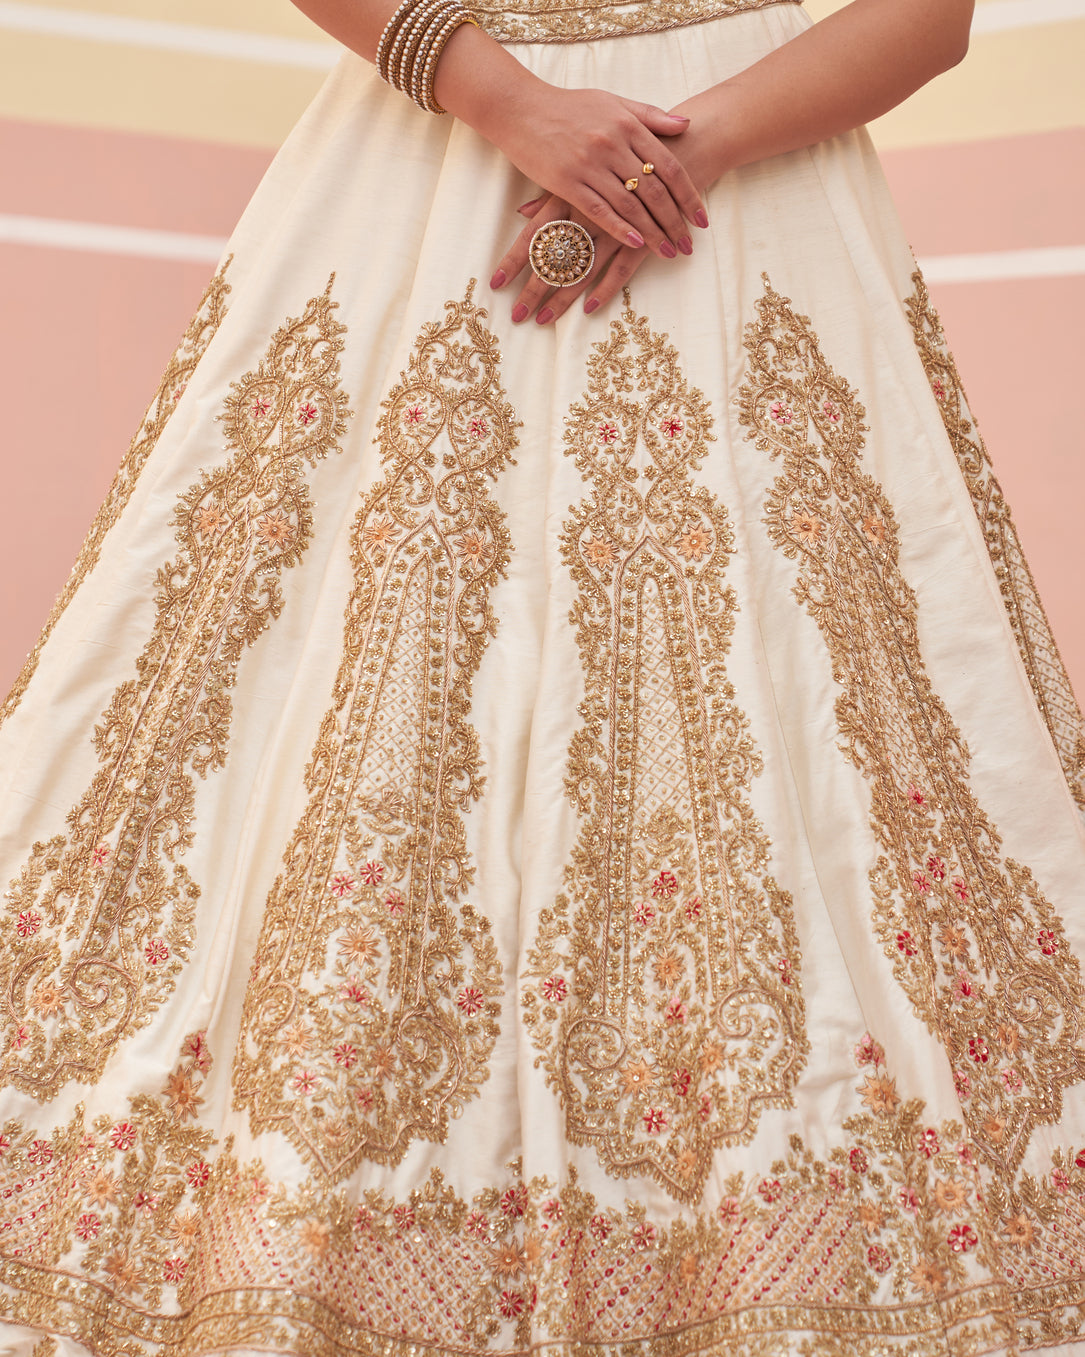 Ivory raw silk lehenga set adorned with intricate beadwork and sequins